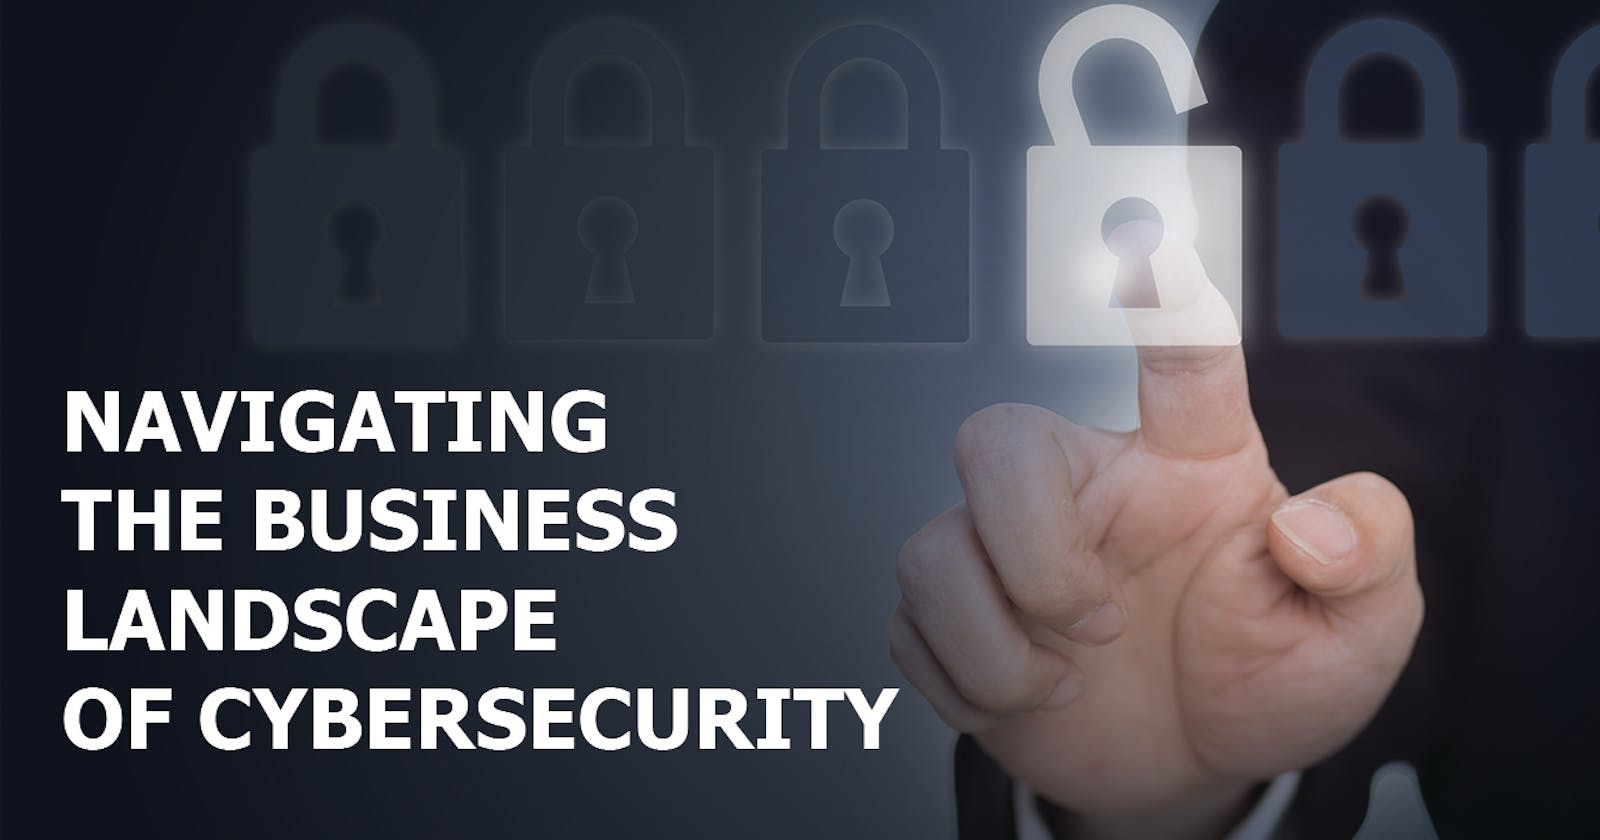 Navigating the Business Landscape of Cybersecurity – Cyberroot Risk Advisory